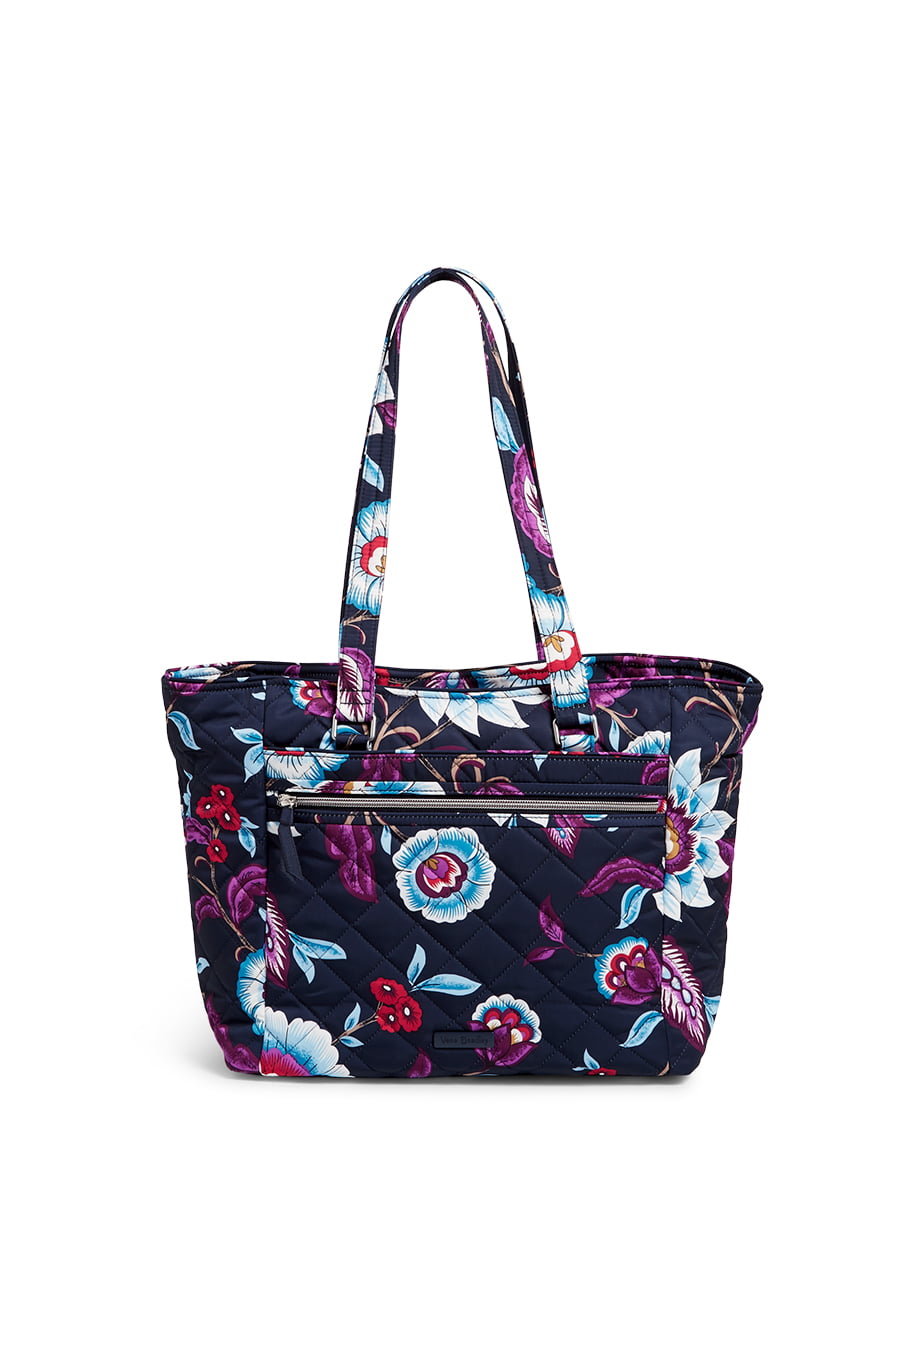 Work Tote Bag Sweet Flowers Blossom College Tote Bag Shoulder Bags Large Capacity Water Resistant with Durable Handle 